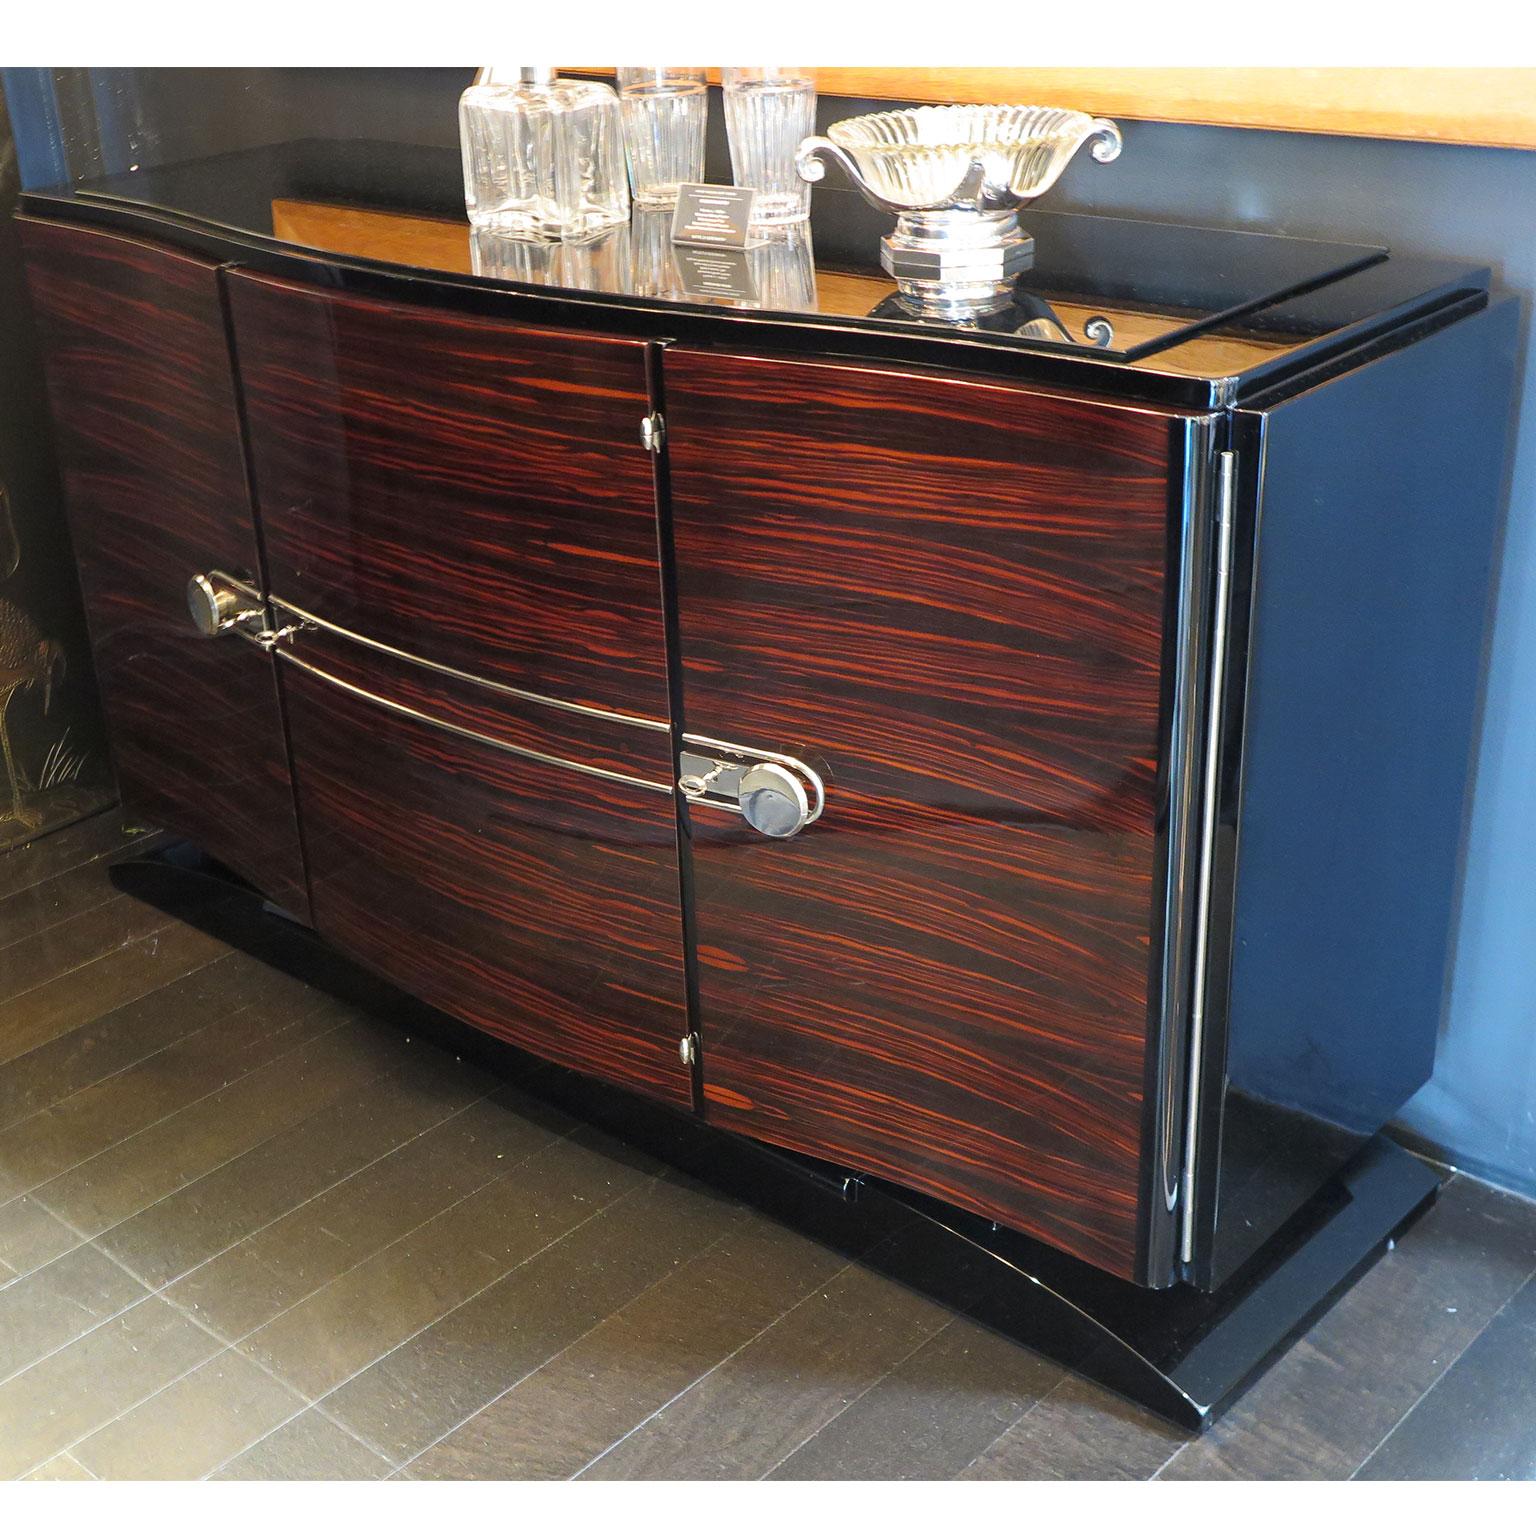 Smaller, elegant Art Deco sideboard with three Macassar ebony front doors. The bowed rectangular frame is entirely in black lacquer along with the base. The top has a thin black glass top. Original polished nickel hardware adorns the front doors.